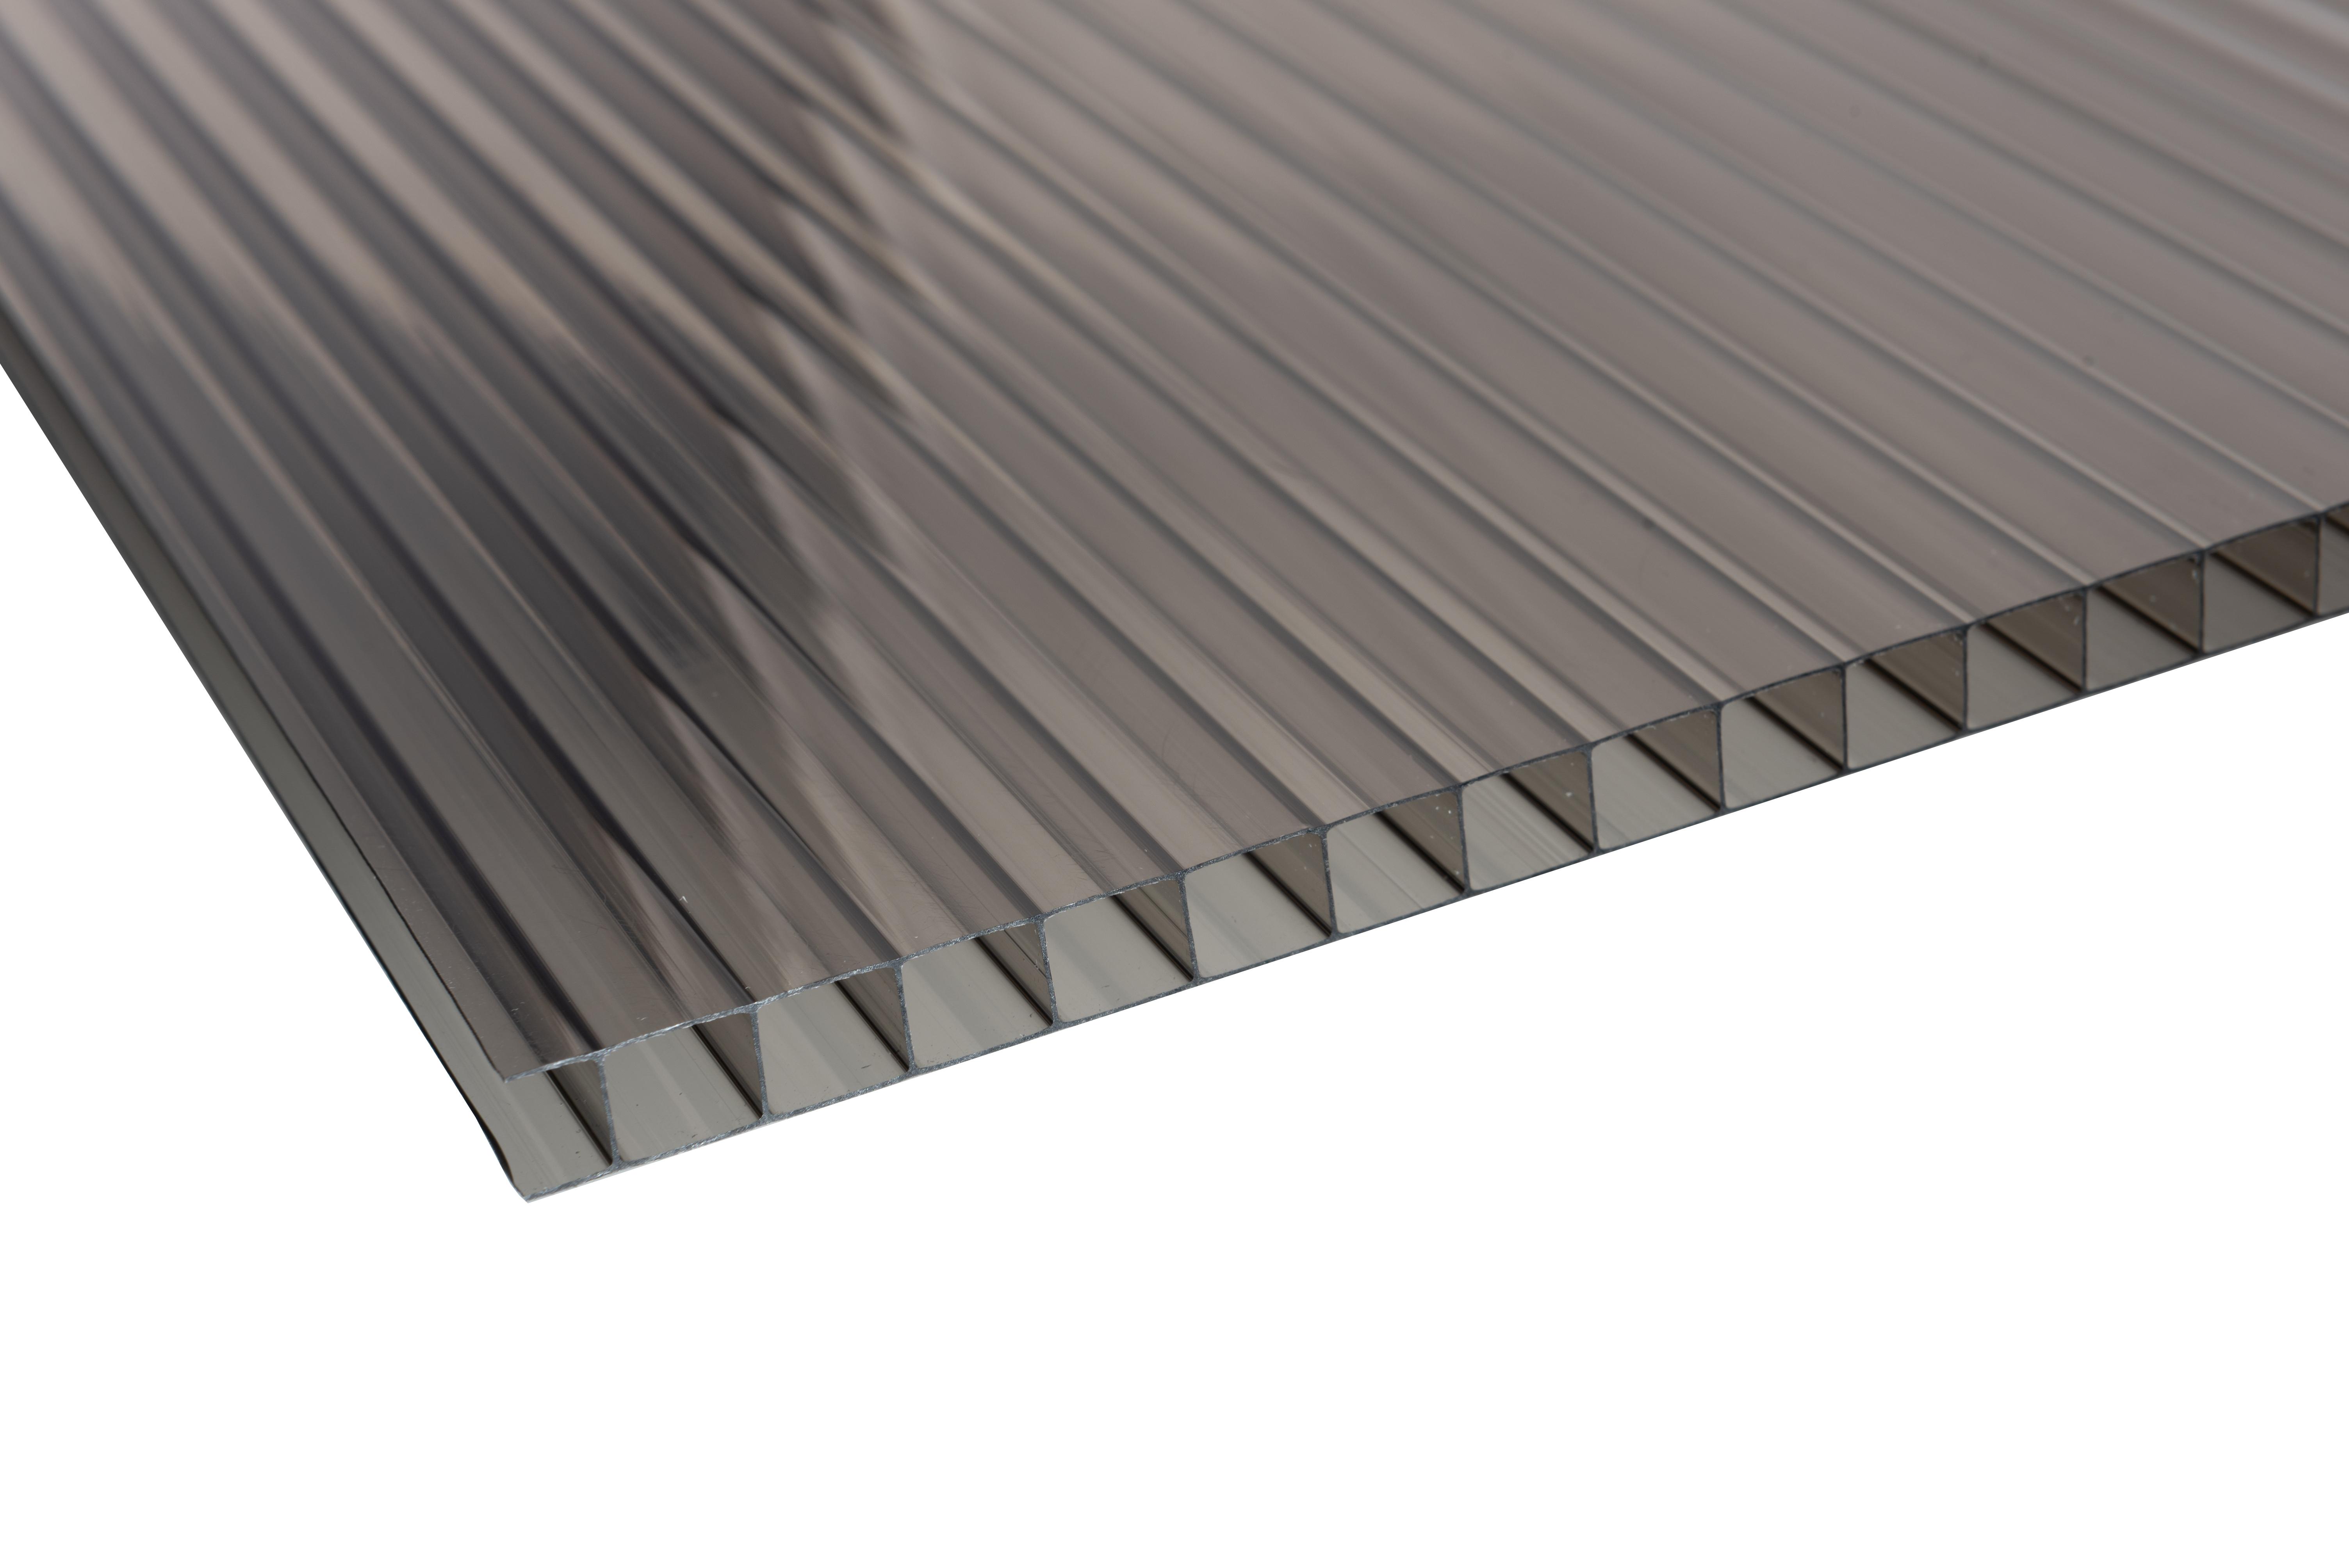 Image of 10mm Bronze Multiwall Polycarbonate Sheet - 2000 x 700mm